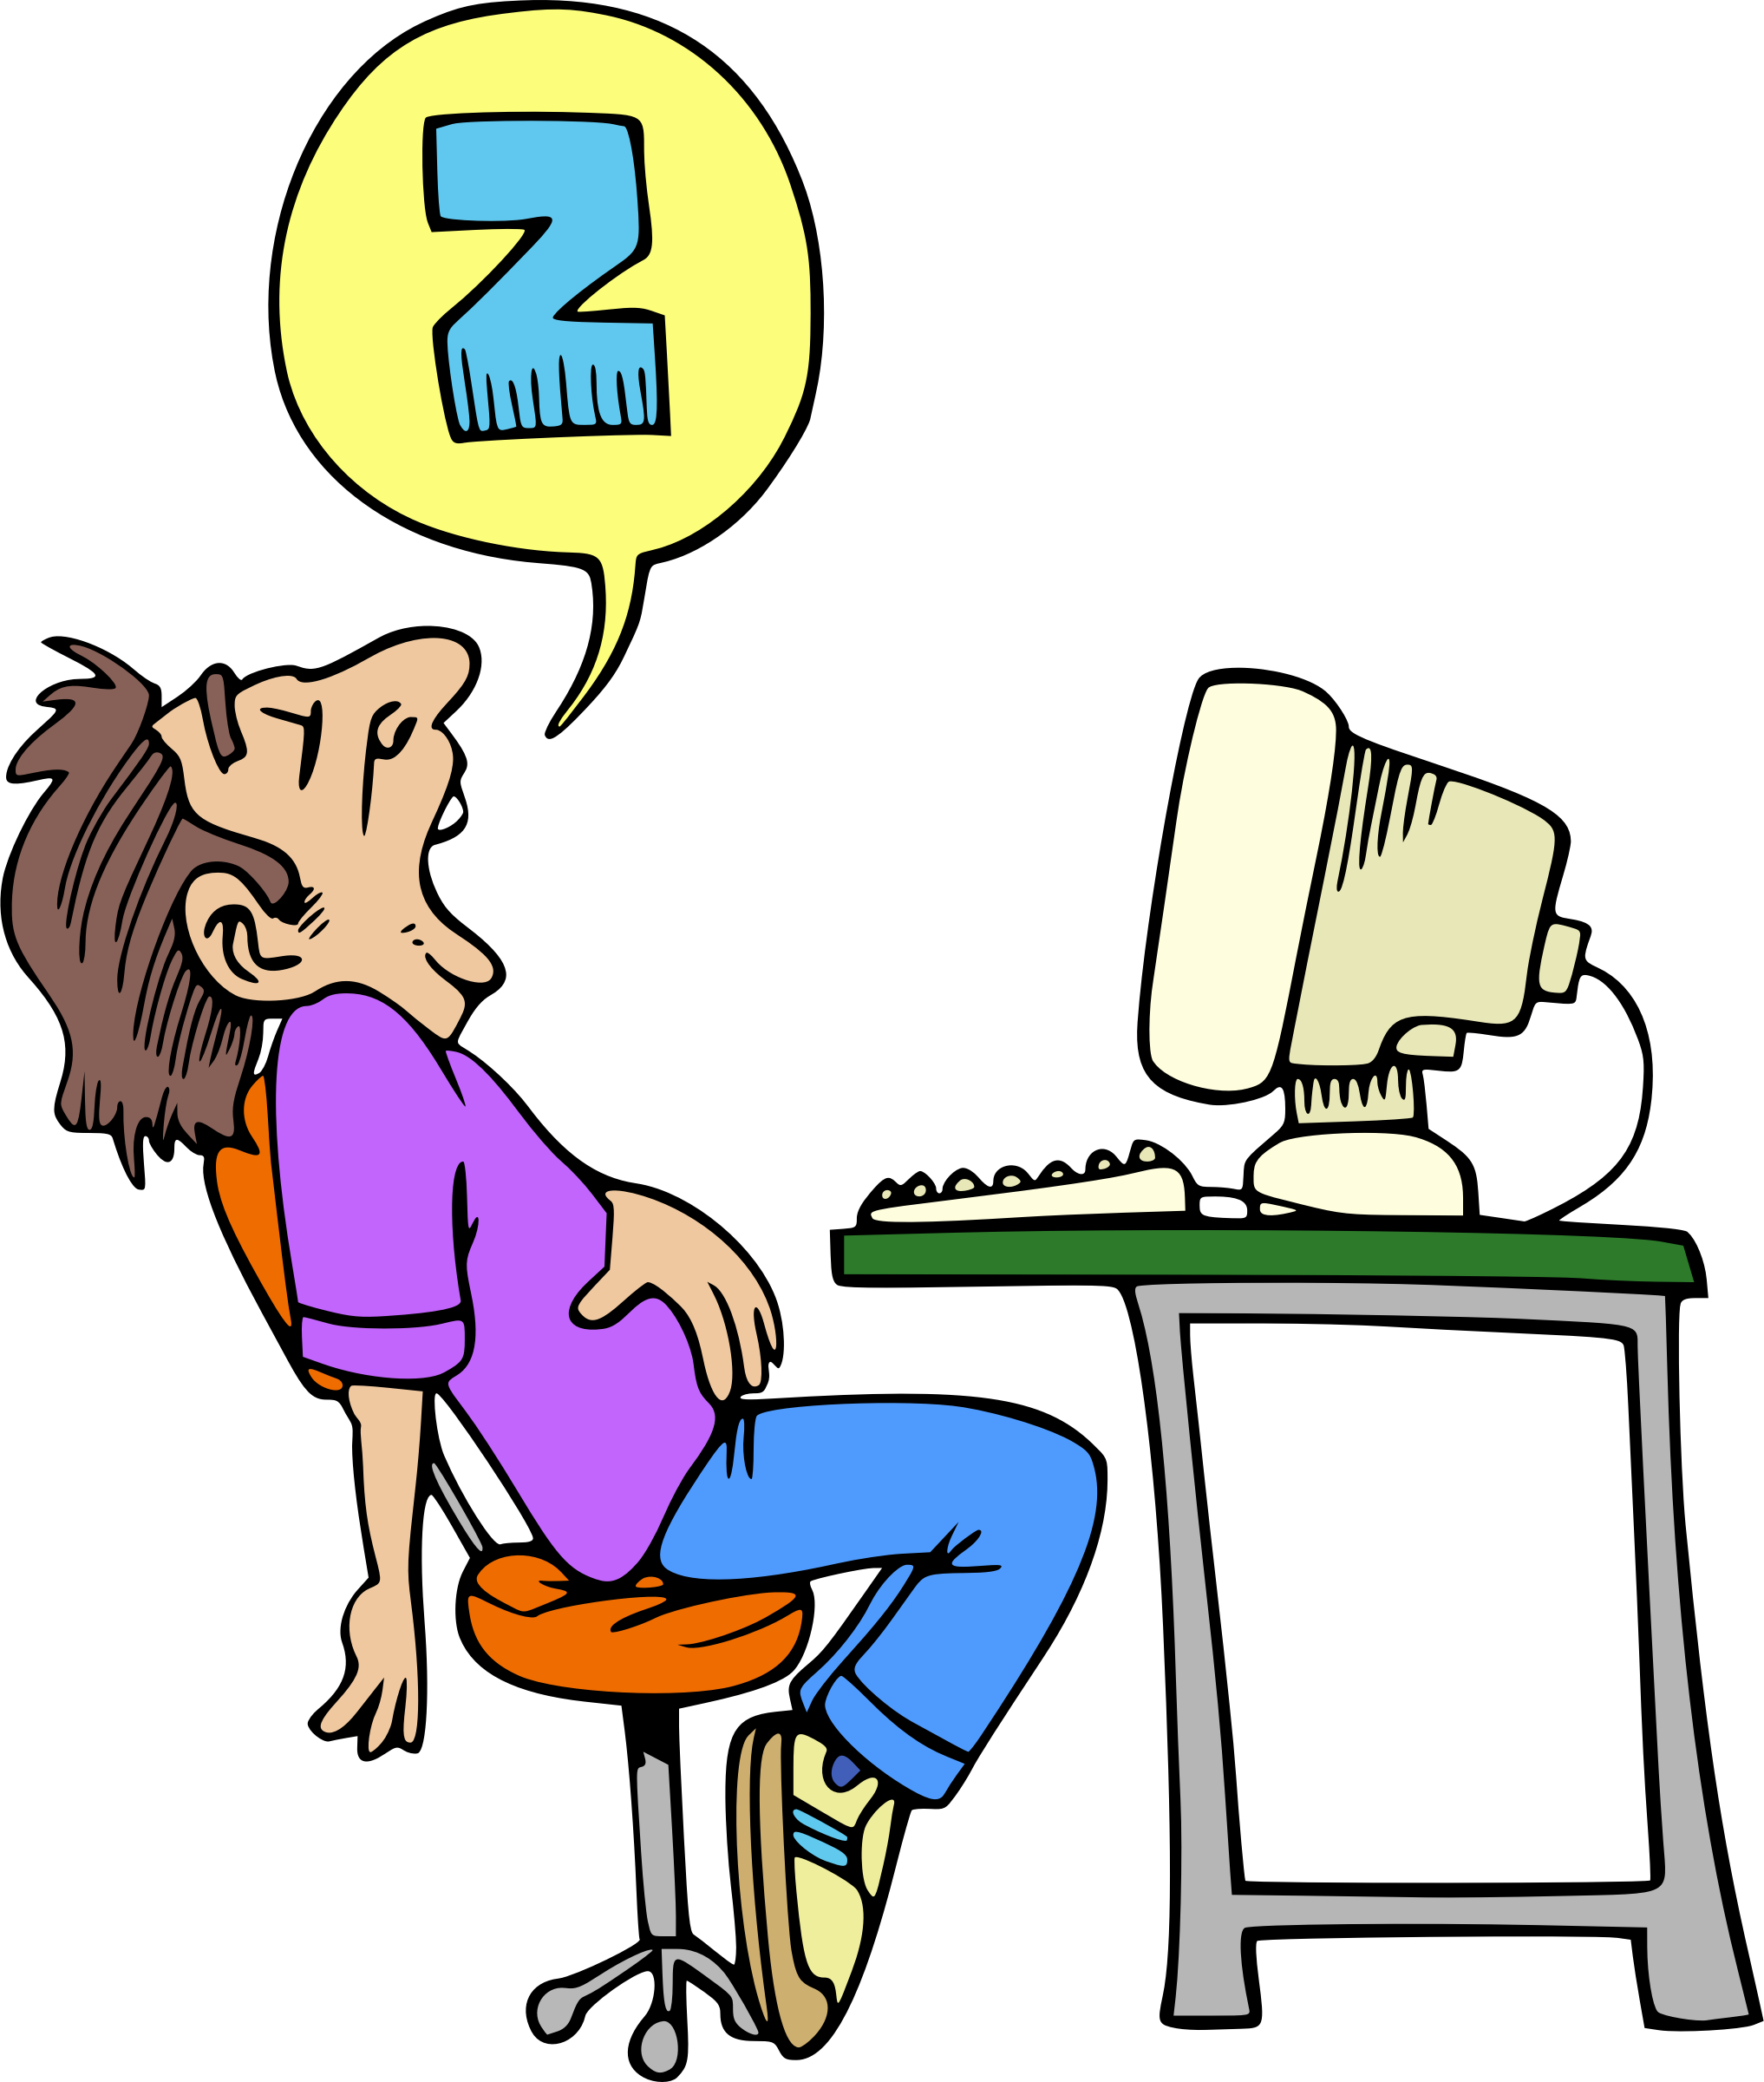 Computer clipart tired, Computer tired Transparent FREE for download on ...